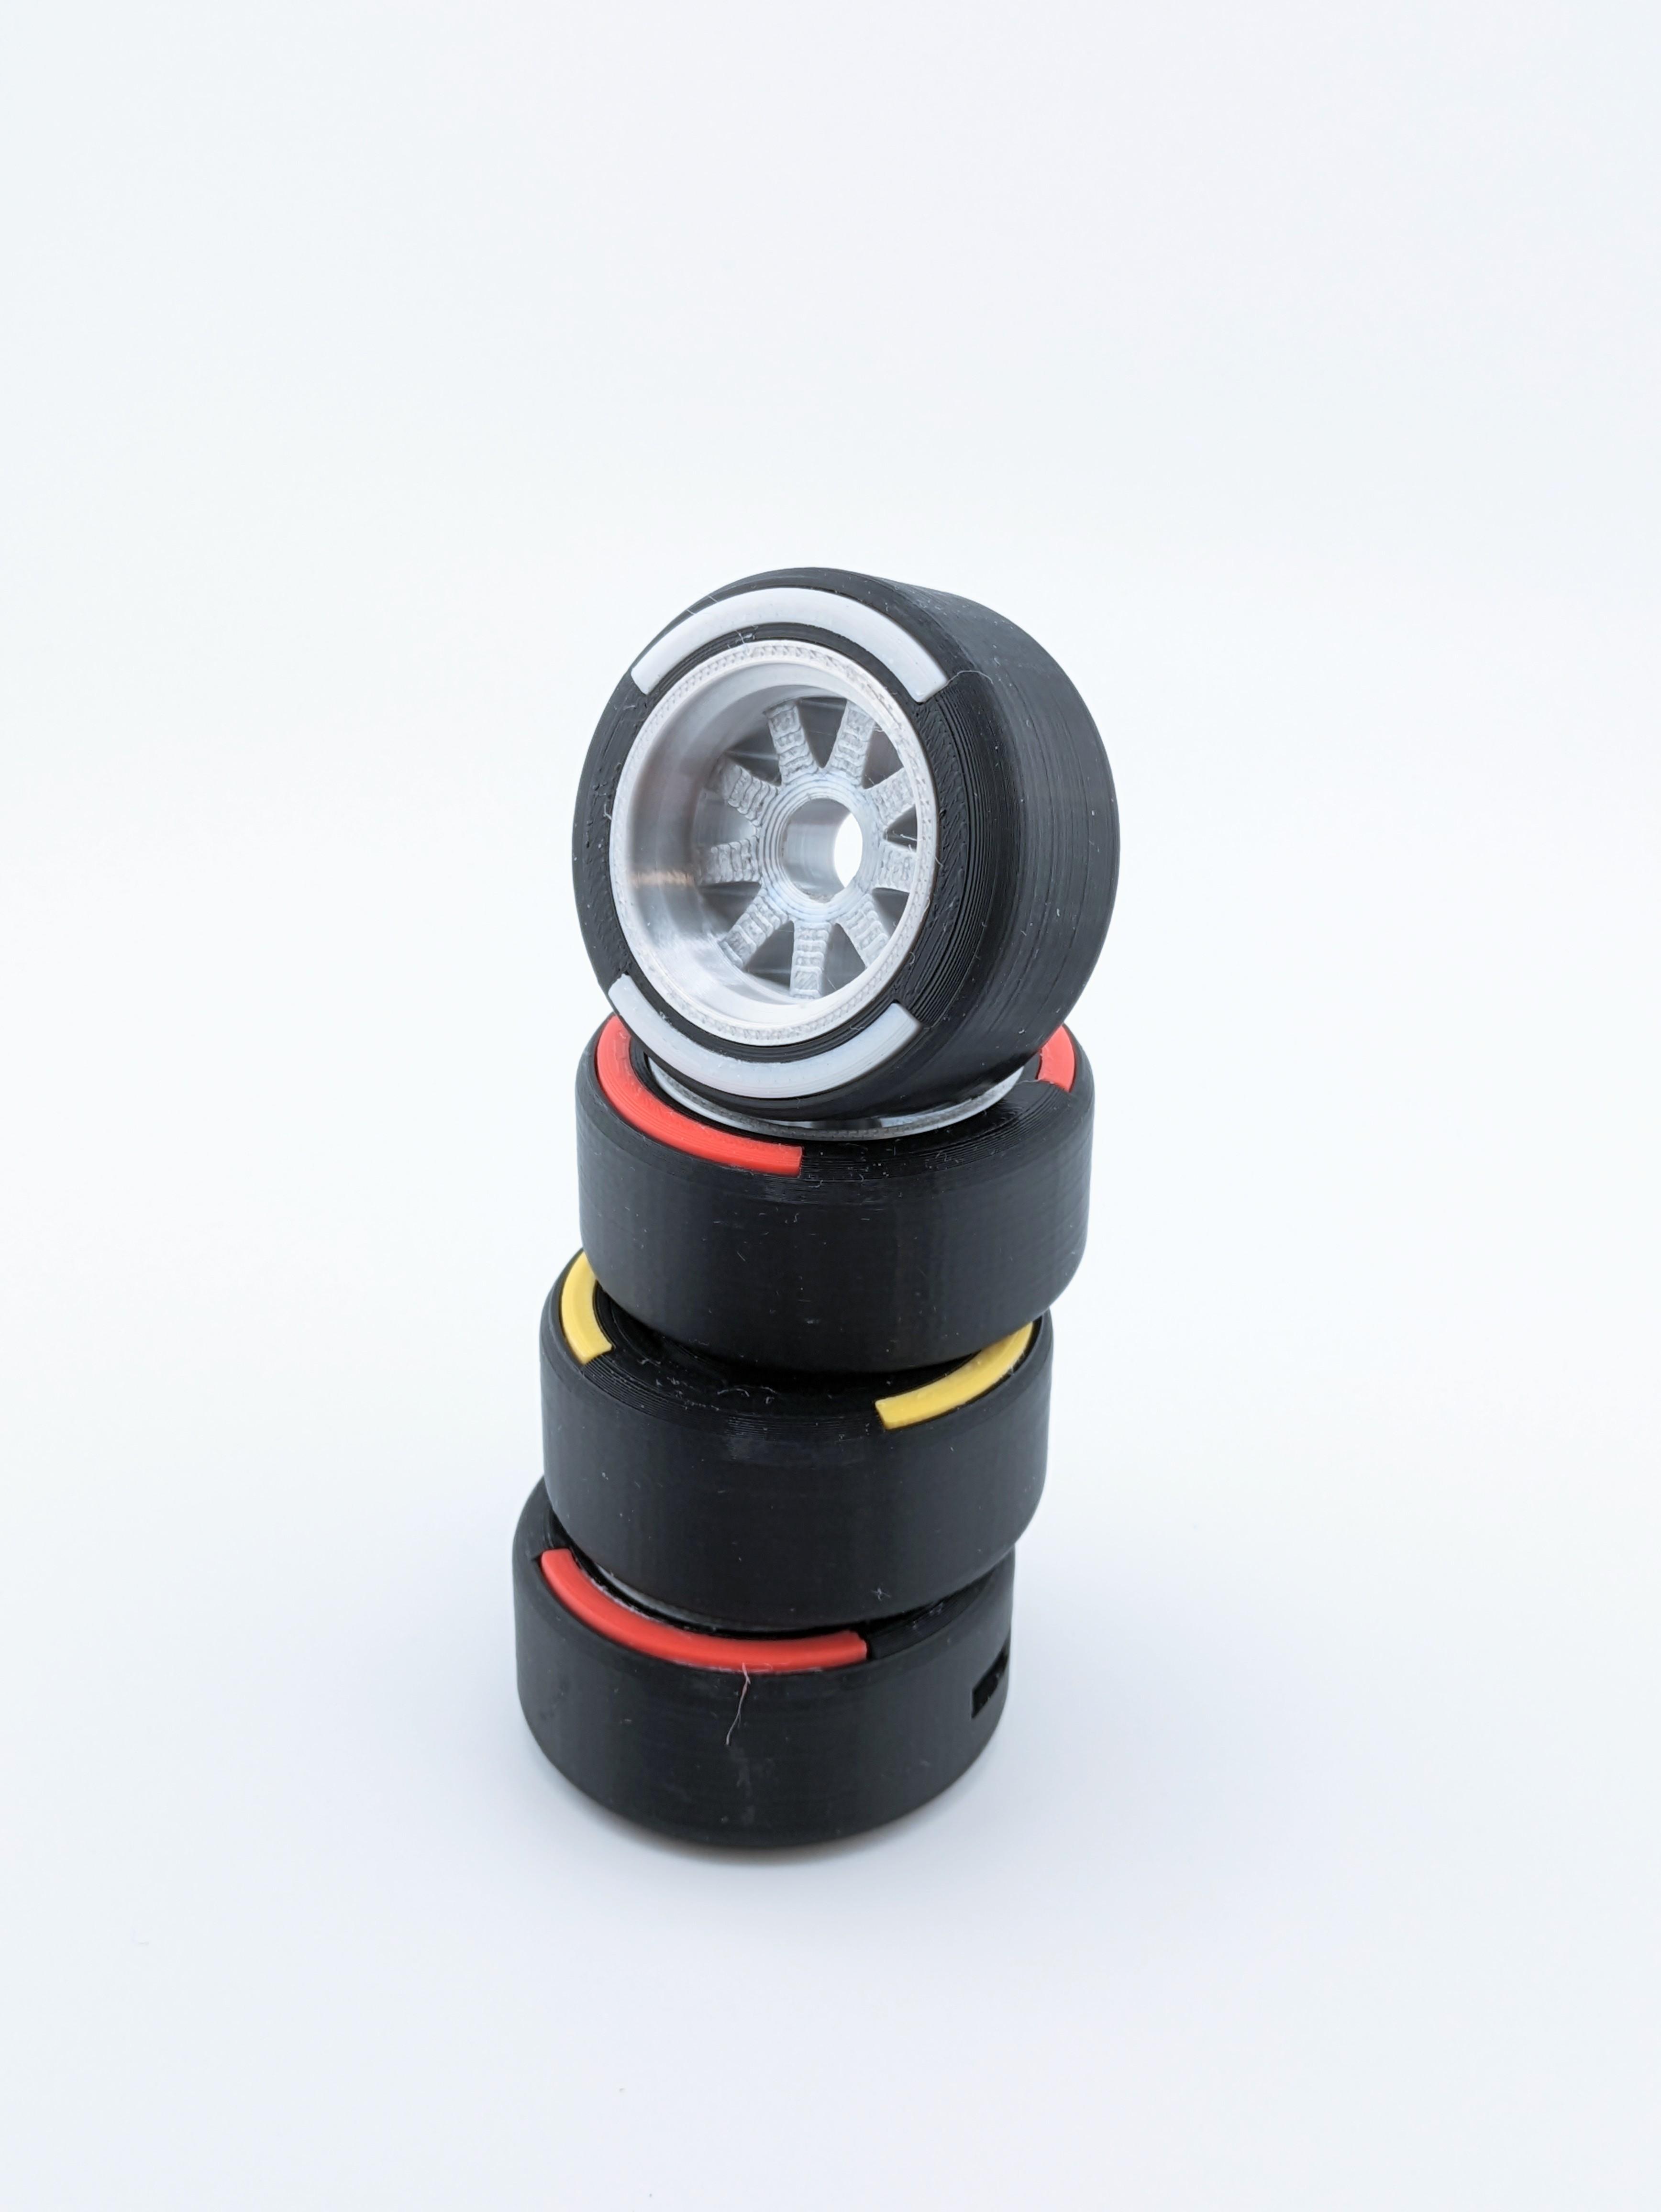 F1 Inspired Tire Keychain (Stationary) 3d model